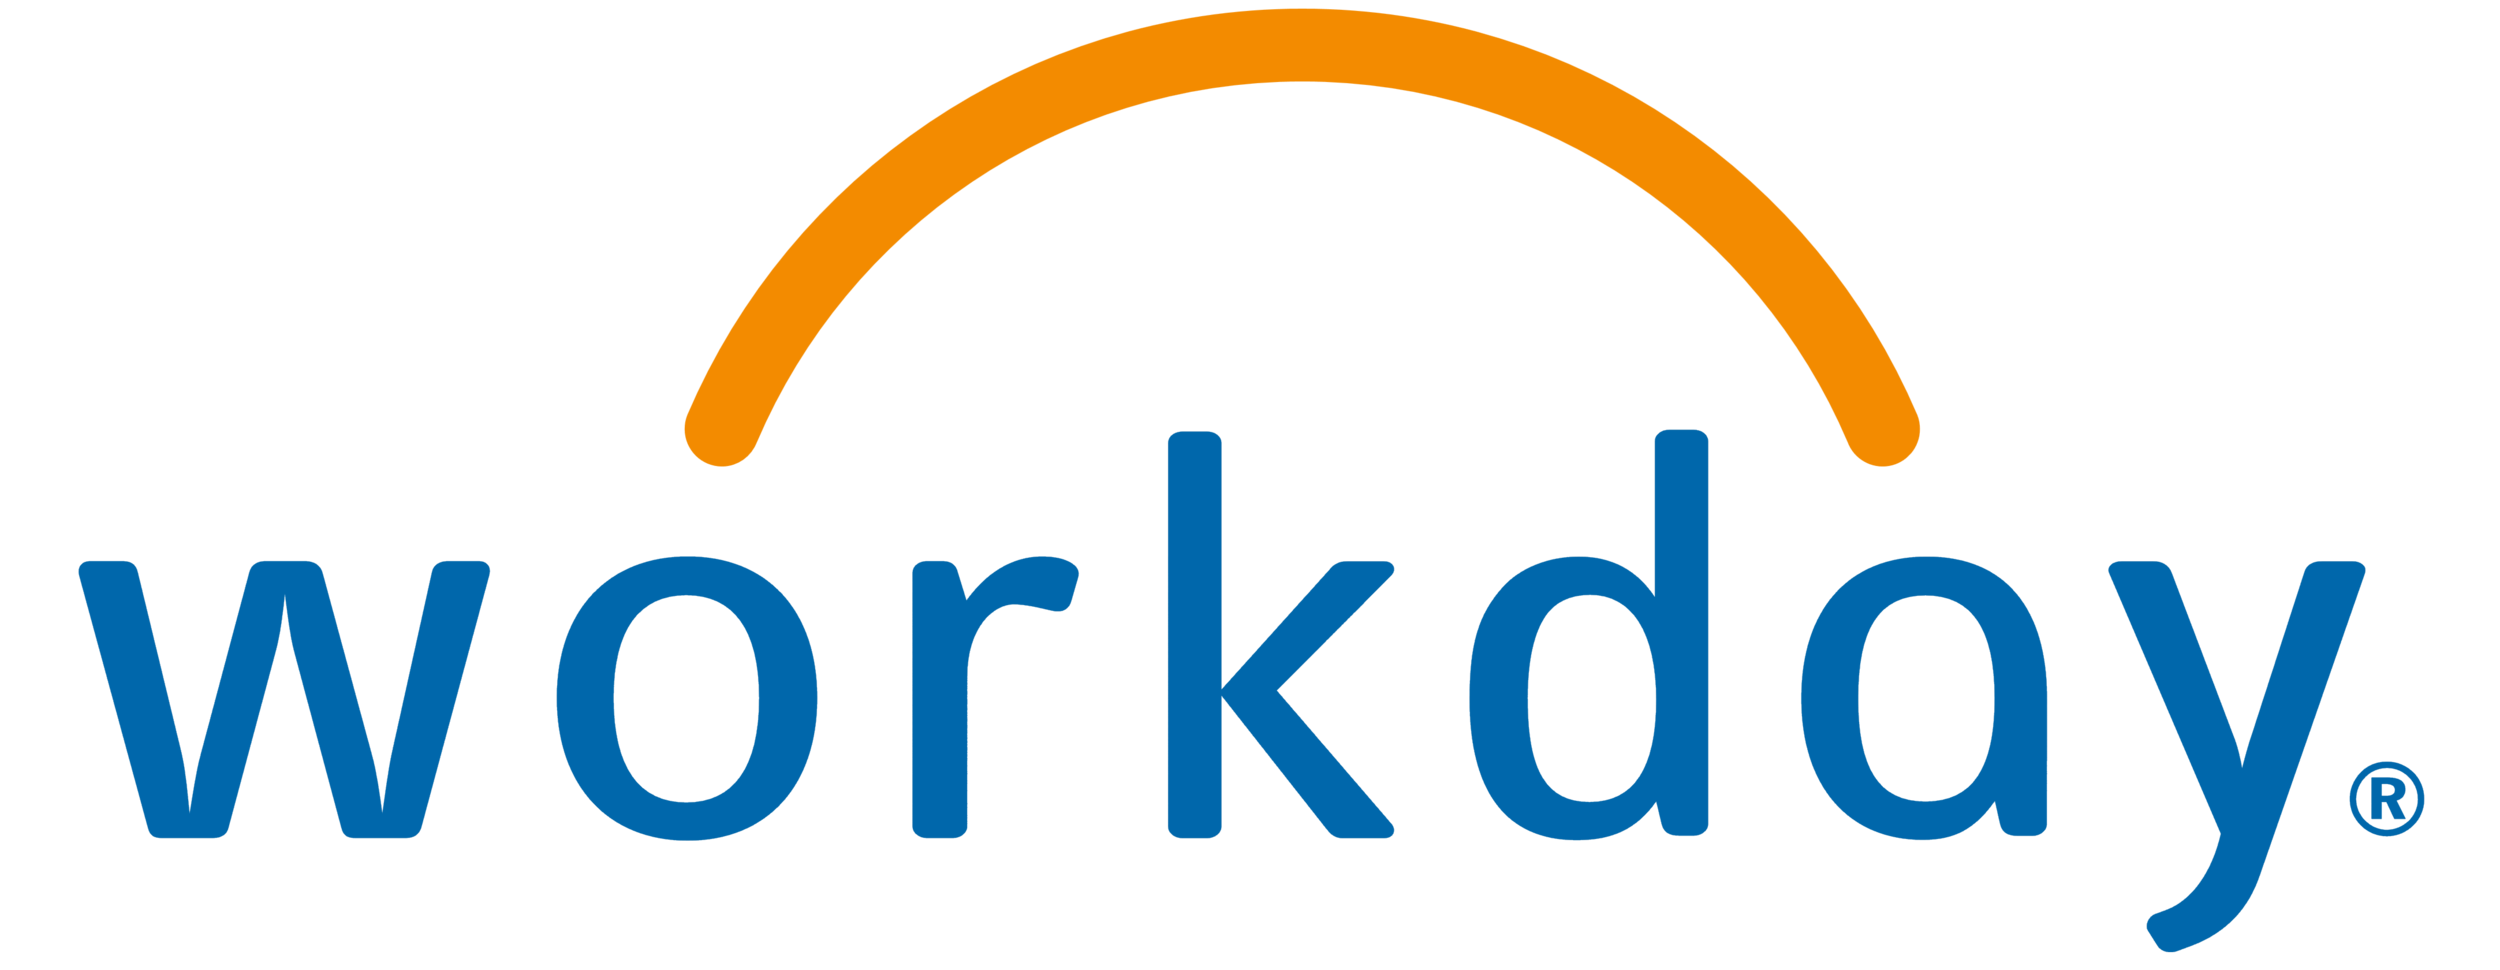 Workday_Logo.png